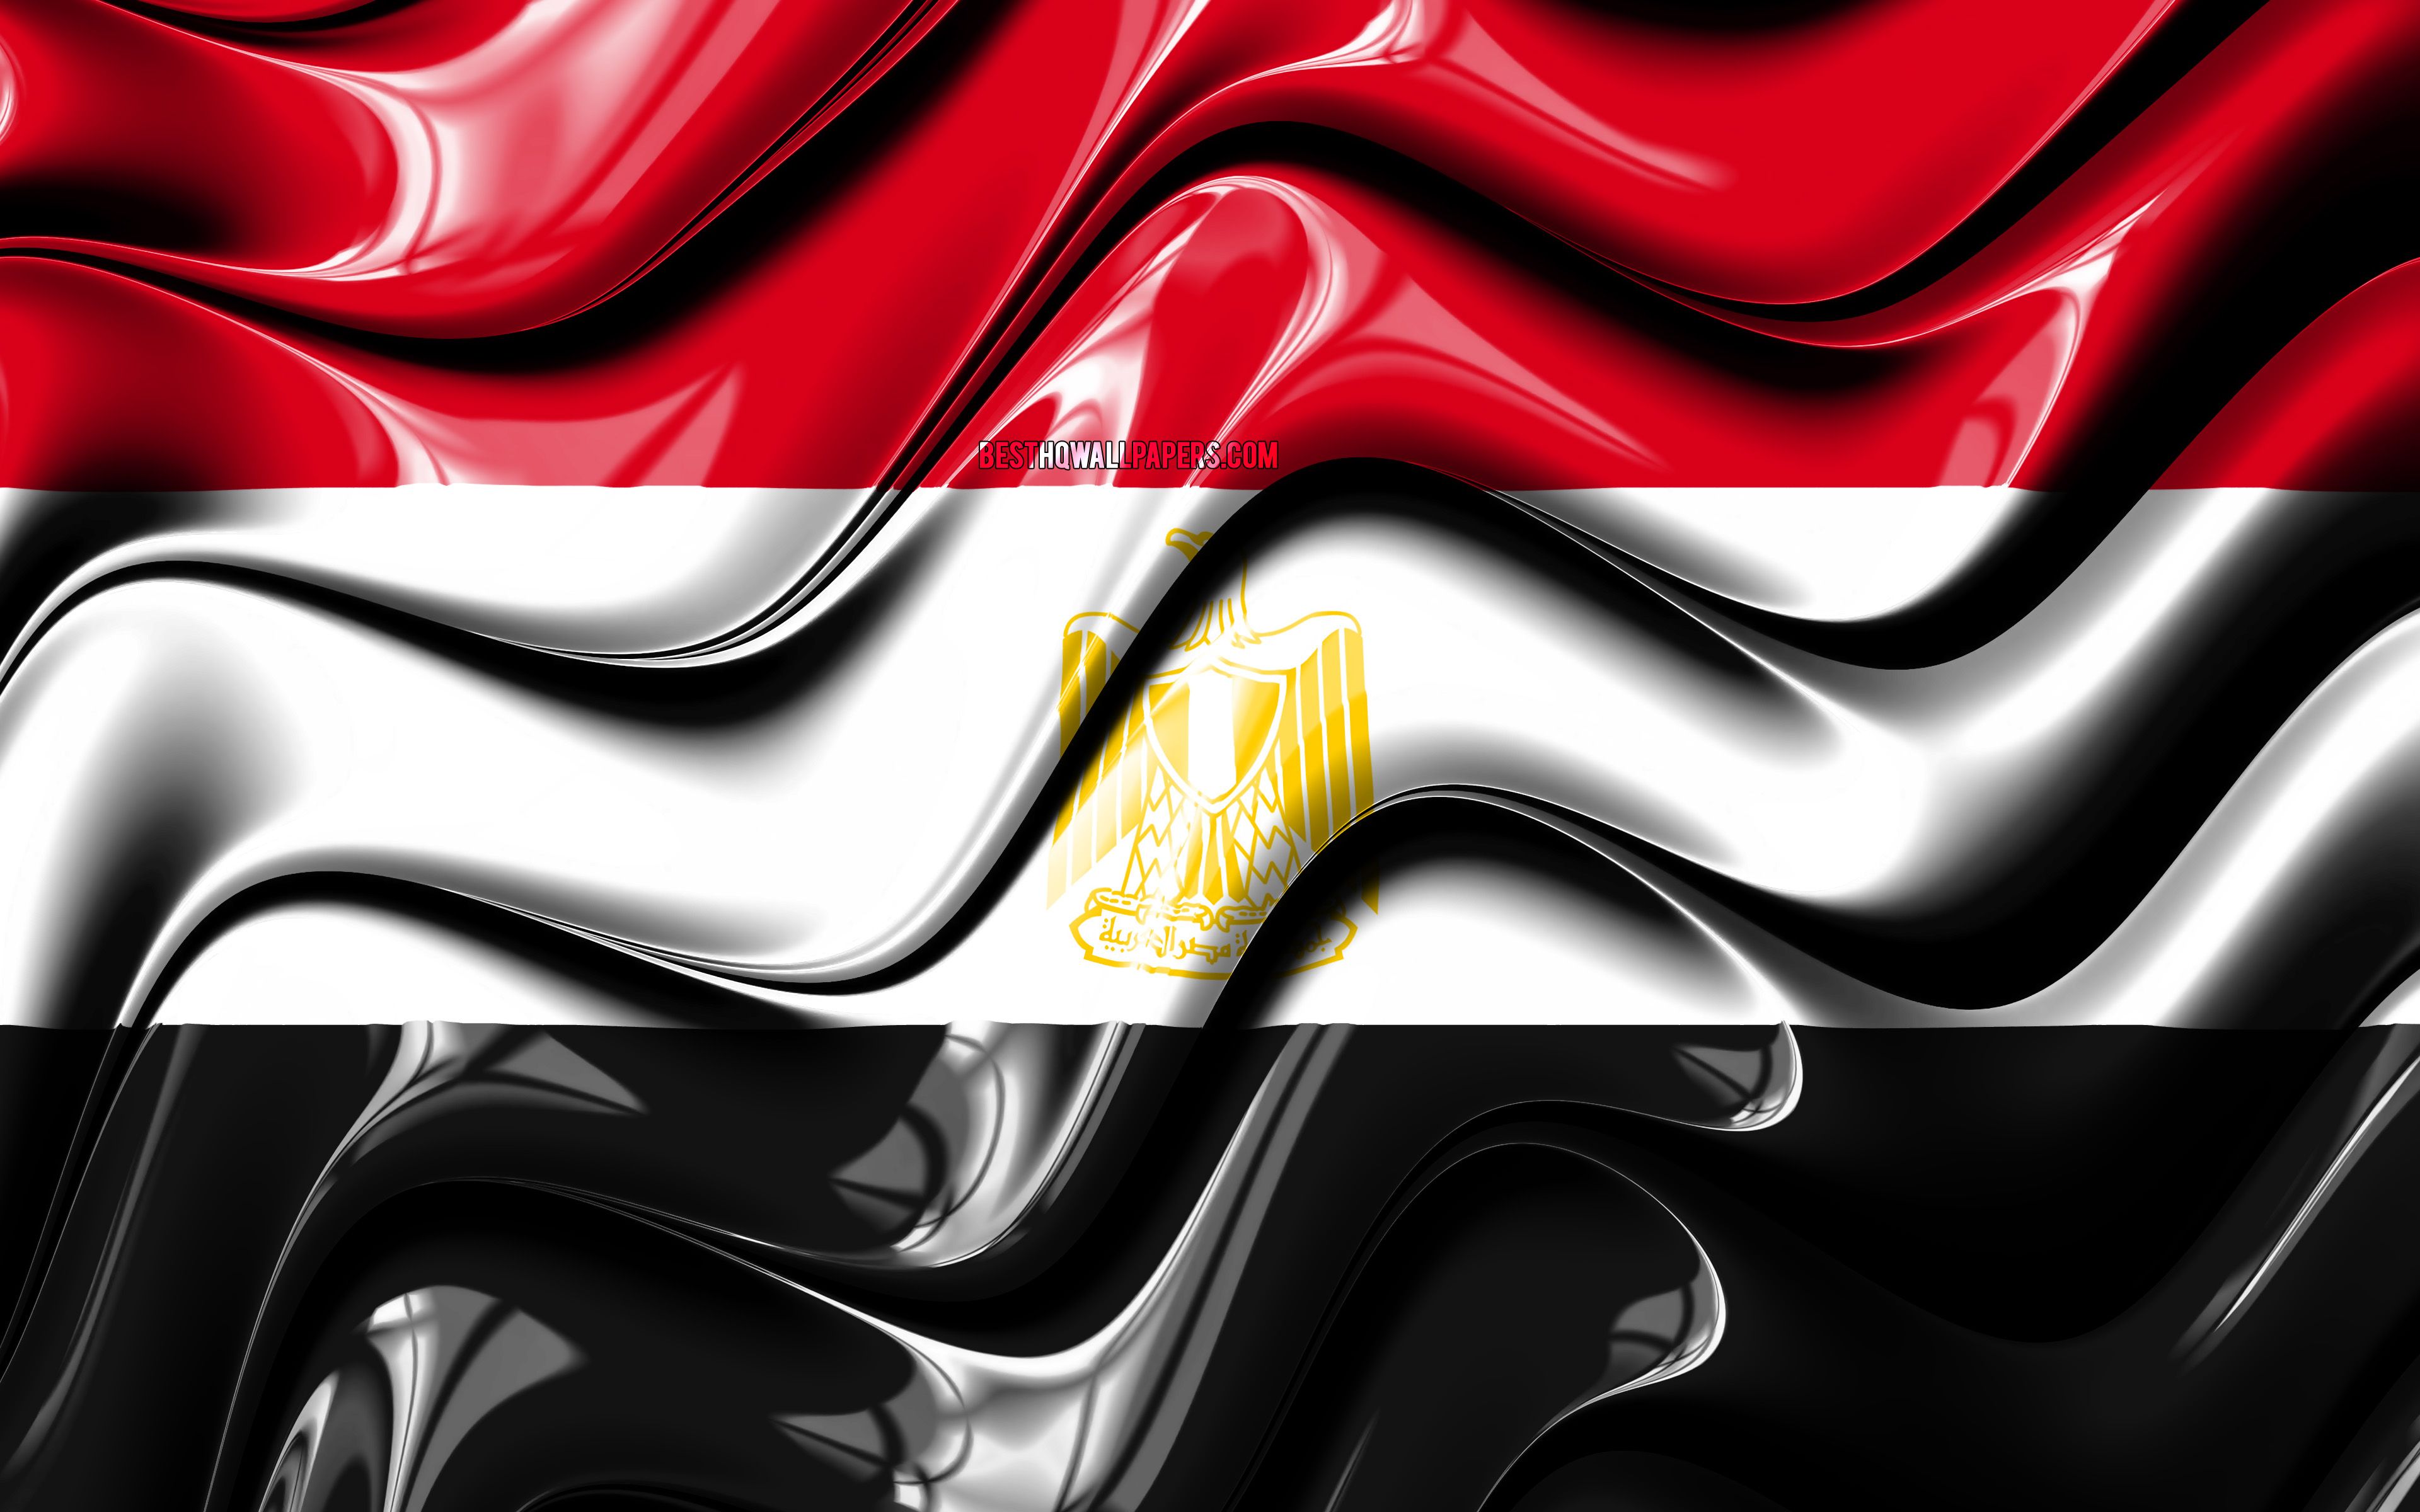 Download wallpaper Egyptian flag, 4k, Africa, national symbols, Flag of Egypt, 3D art, Egypt, African countries, Egypt 3D flag for desktop with resolution 3840x2400. High Quality HD picture wallpaper